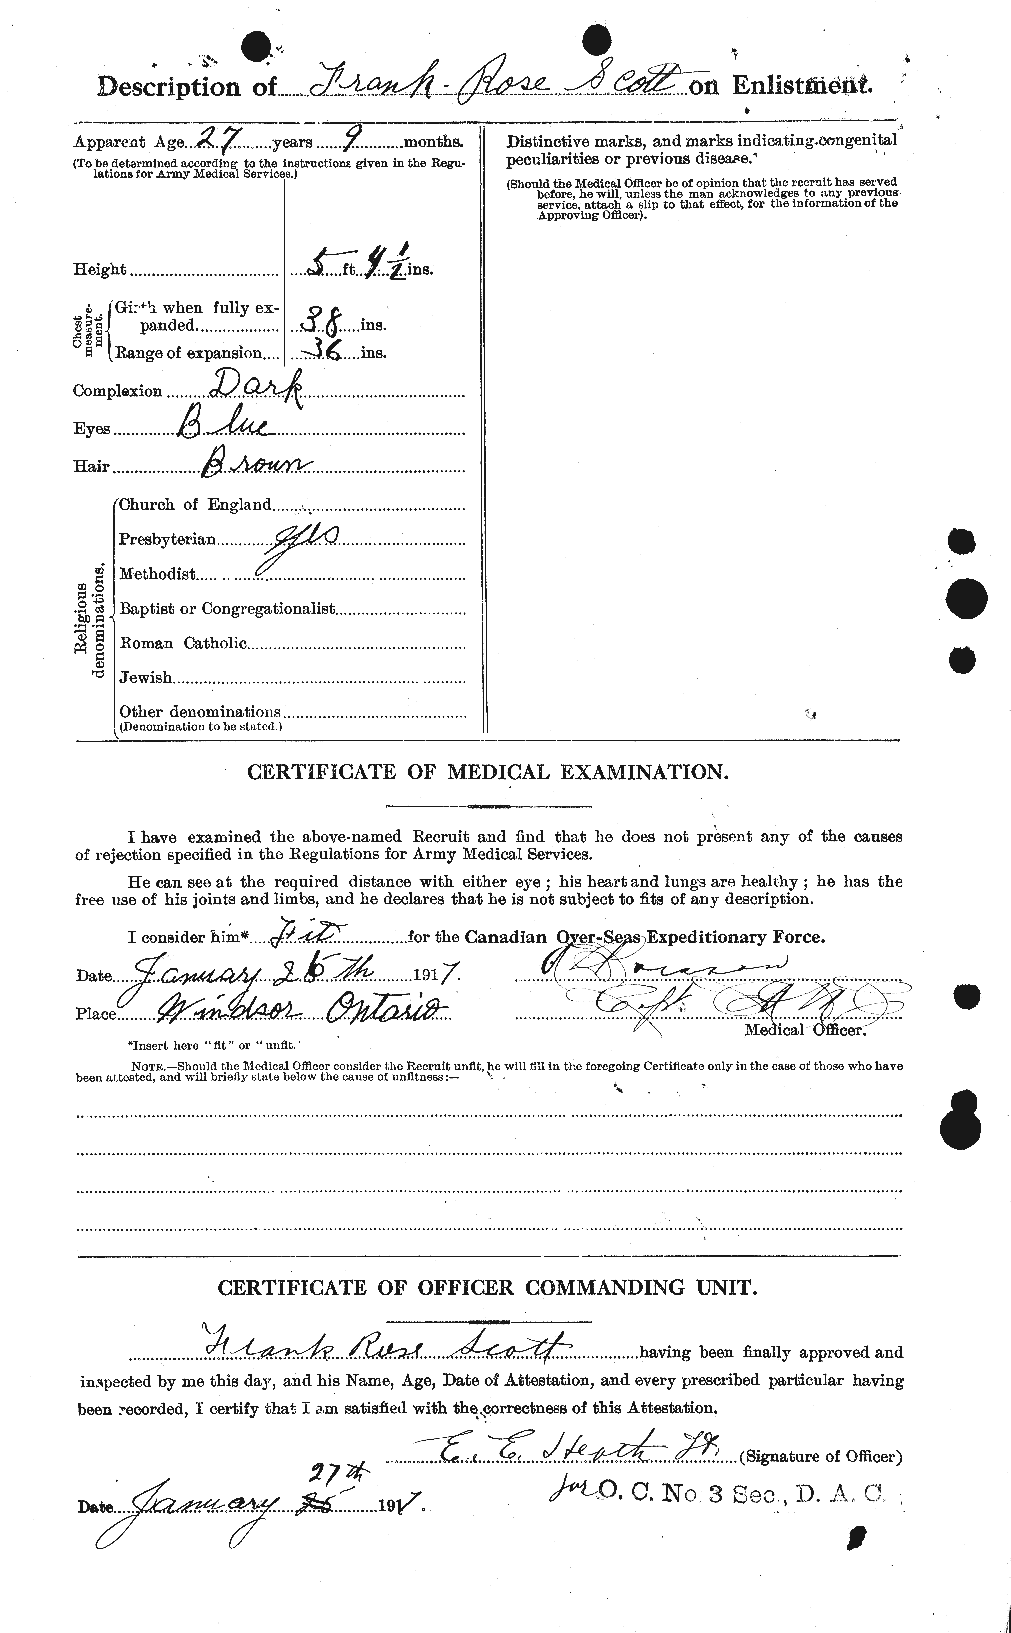 Personnel Records of the First World War - CEF 084693b